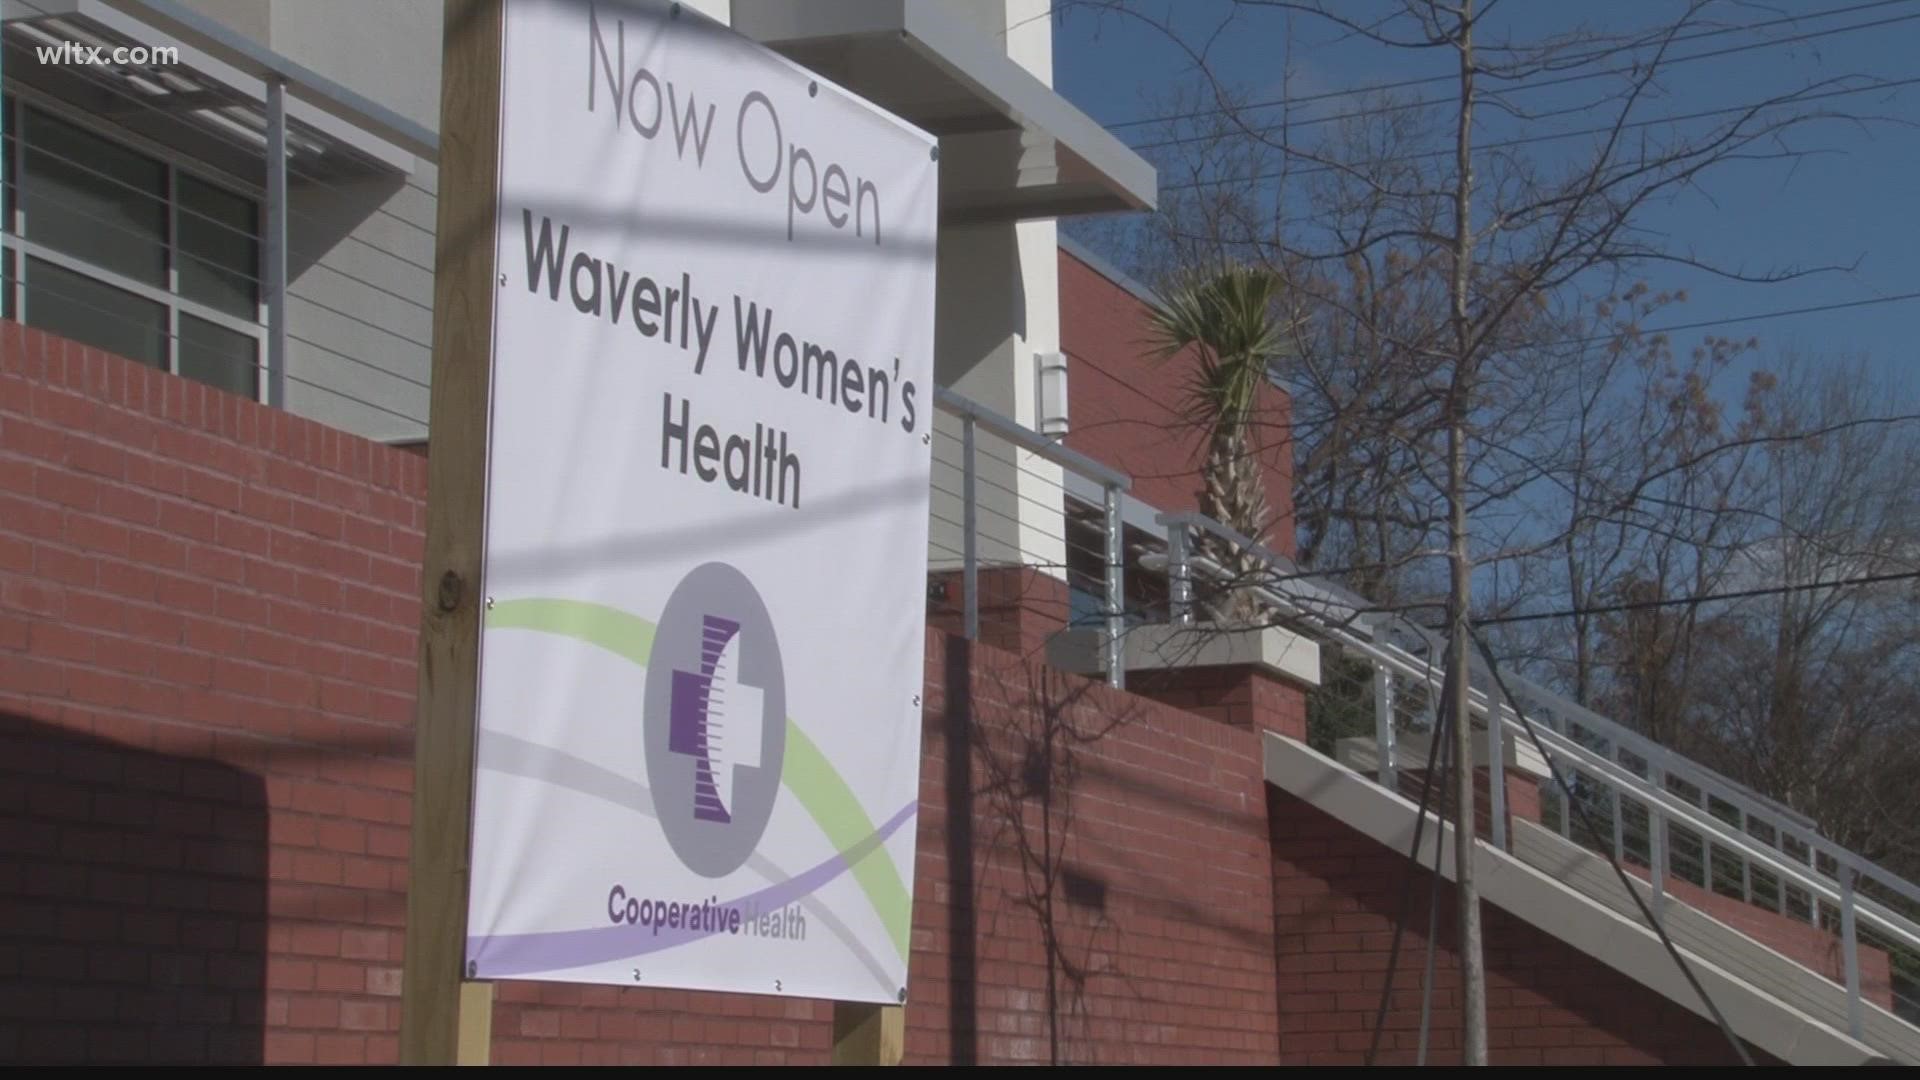 The clinic is aimed at providing women's health services to underserved communities.